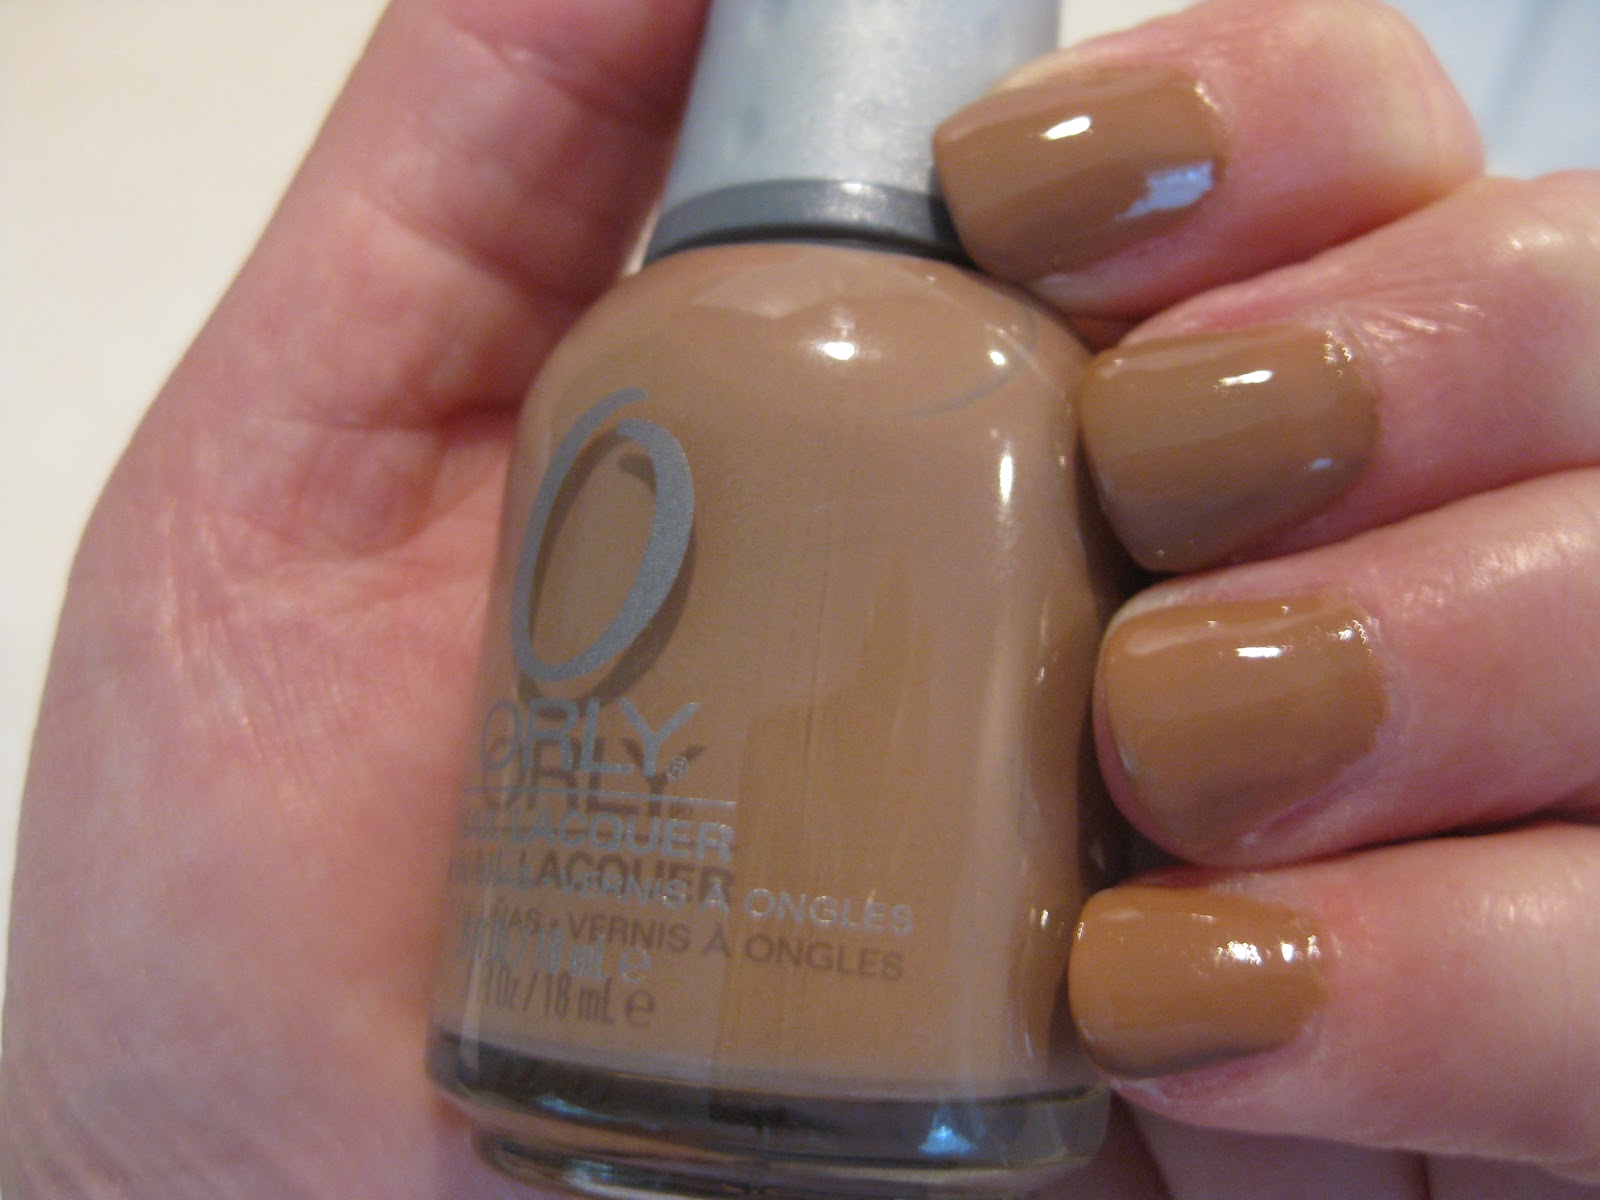 Orly Nail Lacquer in "Coffee Break" - wide 6